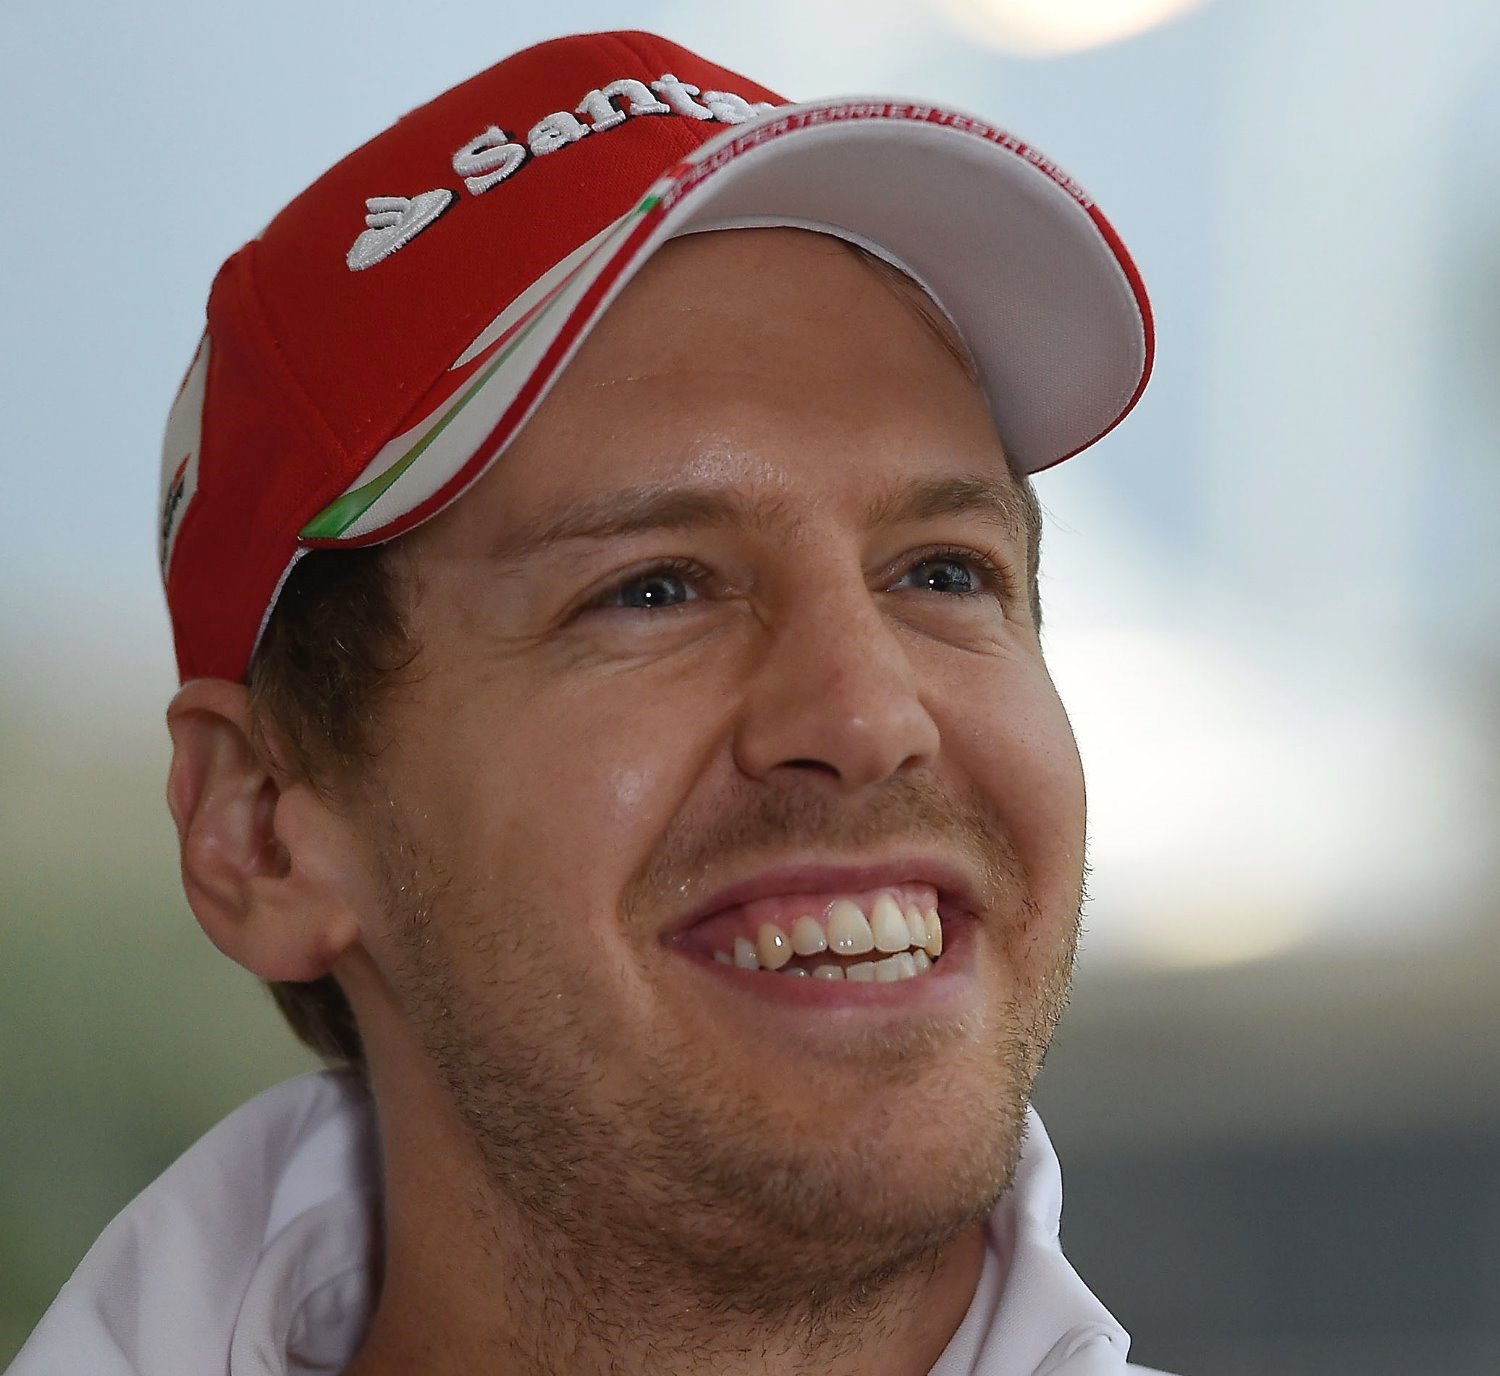 Paybacks are a bitch, but Vettel to nice a guy for that